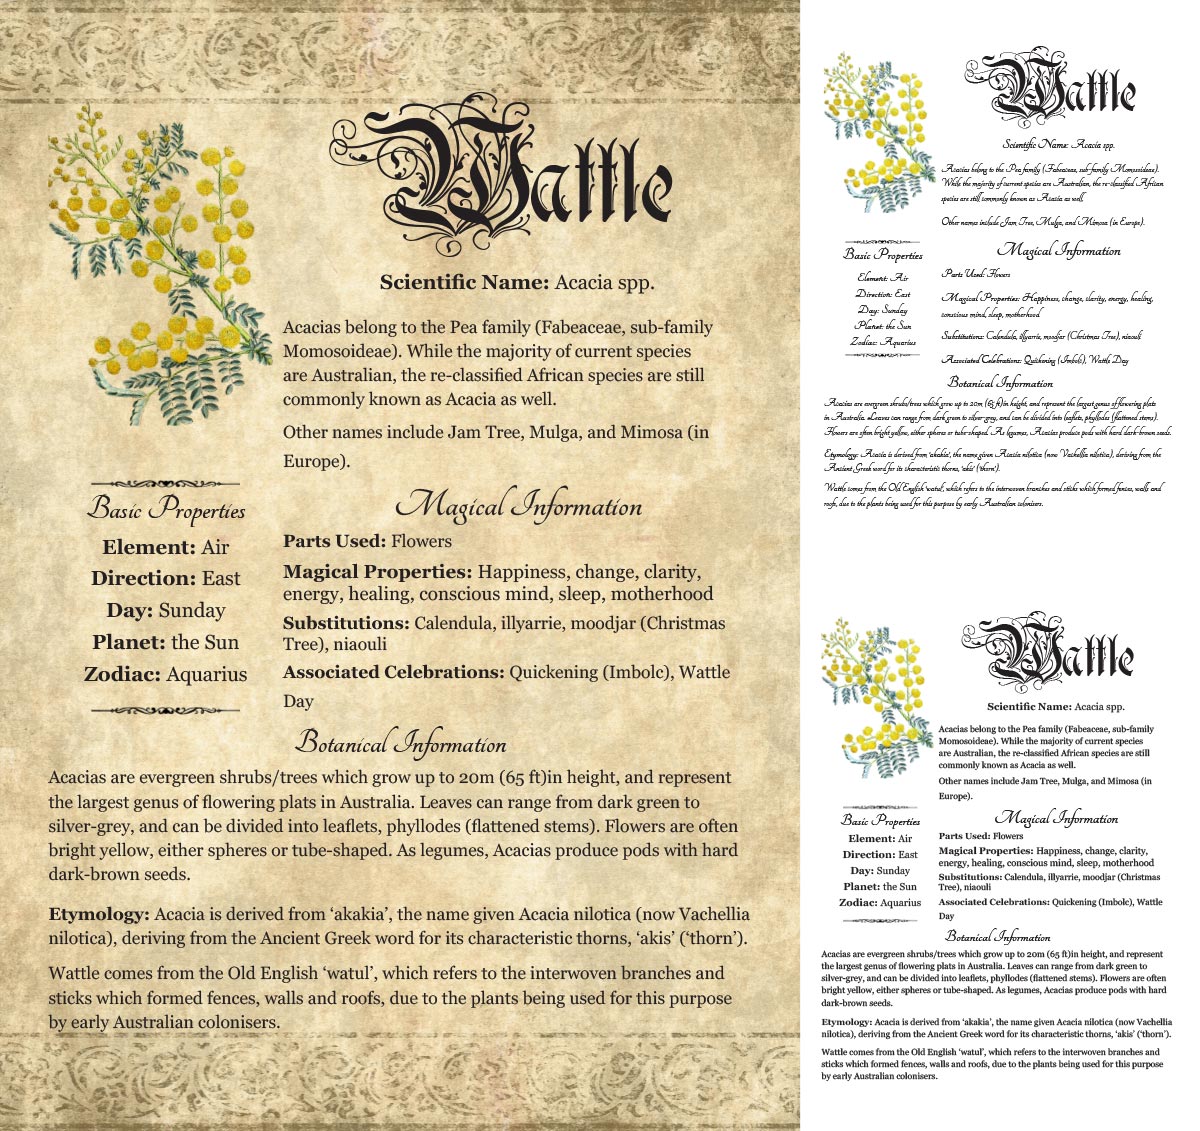 Collage of 3 versions of the Wattle grimoire page: with a readable/serif vs script font + with/without background